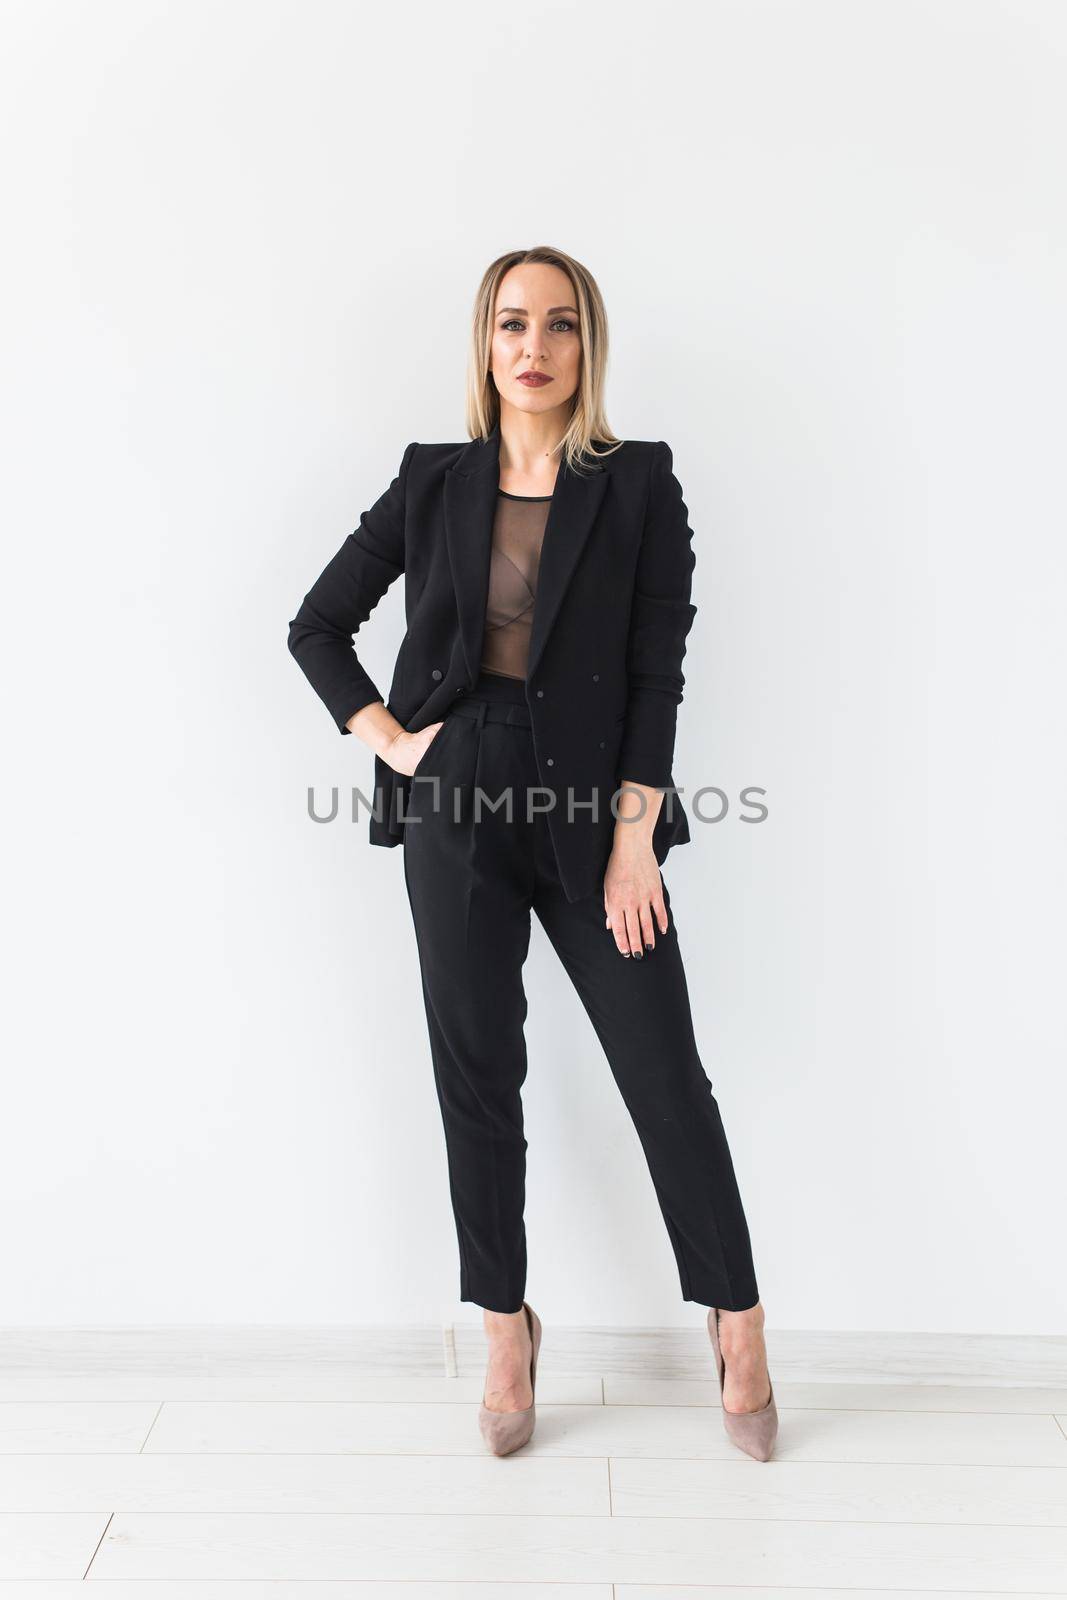 Sexy business woman posing on white background. by Satura86